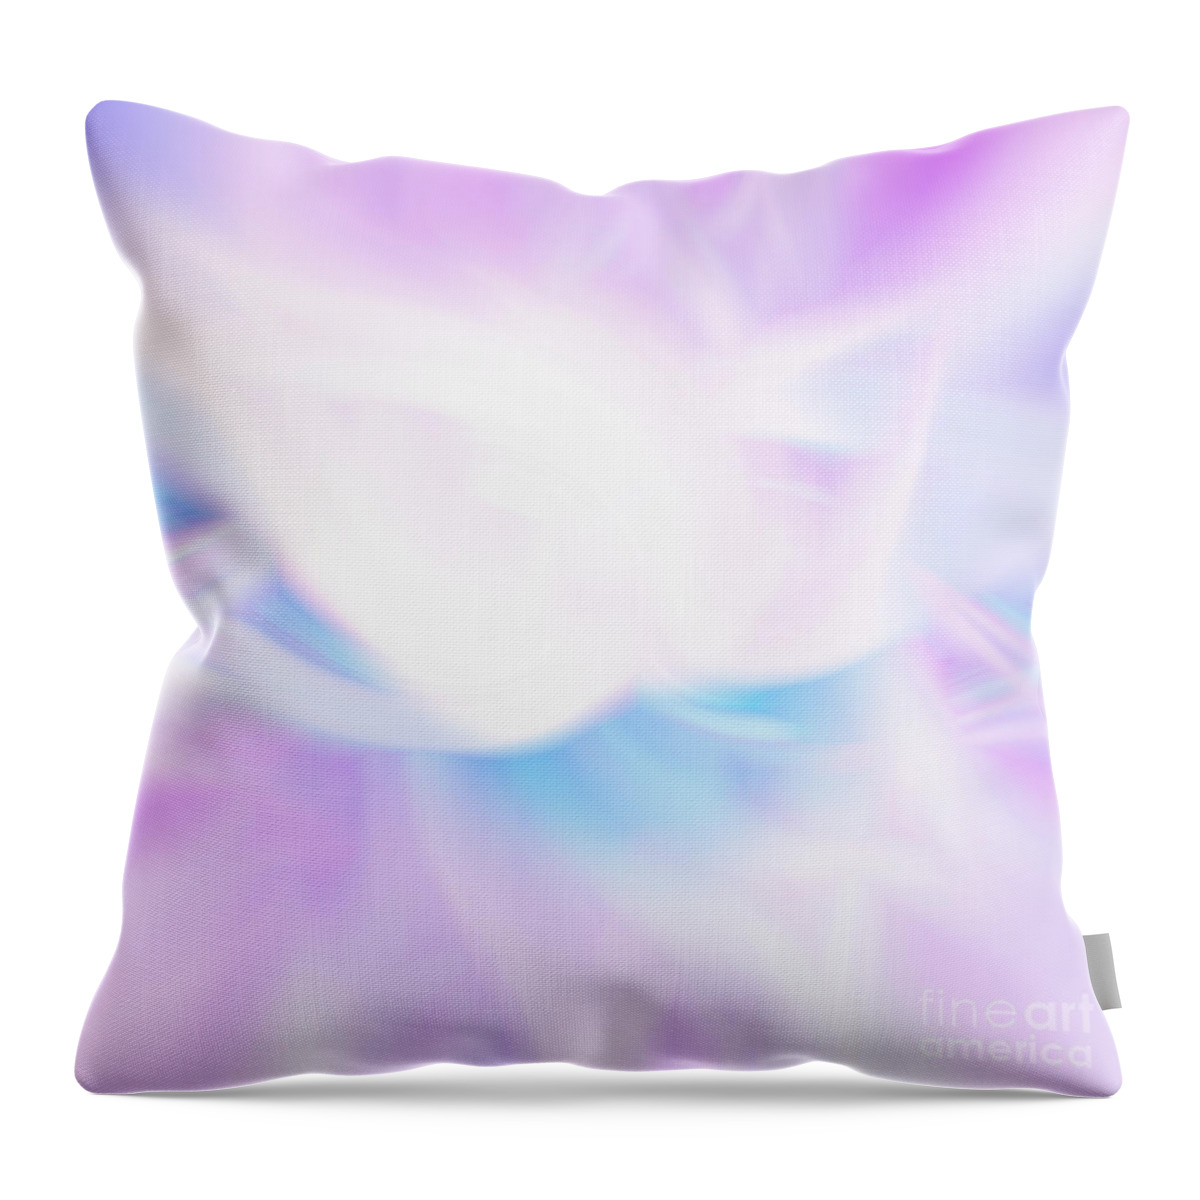 Abstract Throw Pillow featuring the digital art Light Purple Abstract by Phill Petrovic